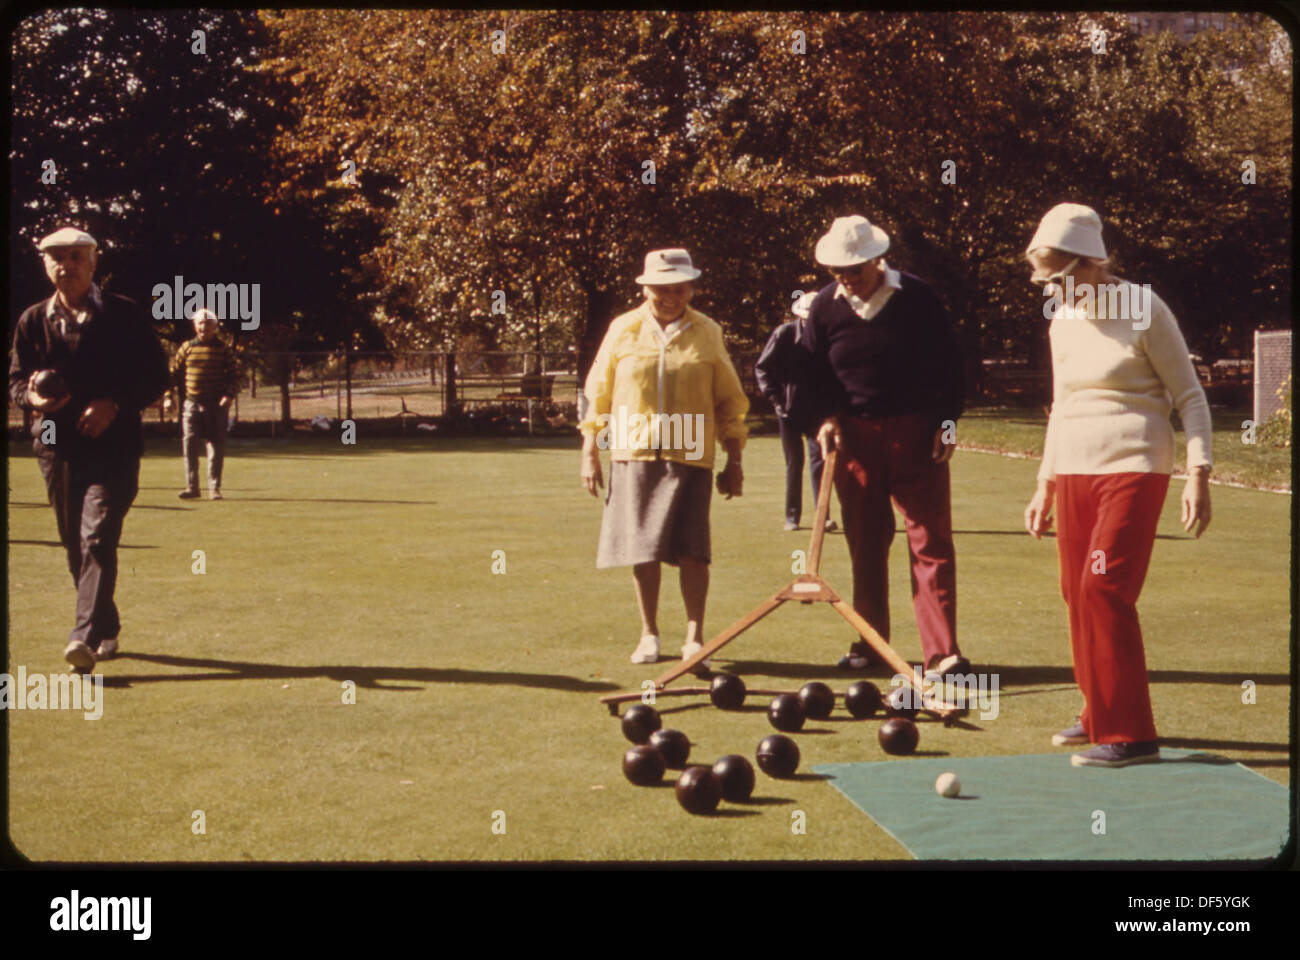 MEMBERS OF THE BOWLING GREEN BOWLING CLUB MEET FOR A GAME IN CENTRAL PARK. THE NEW YORK CITY DEPARTMENT OF PARKS... 551759 Stock Photo